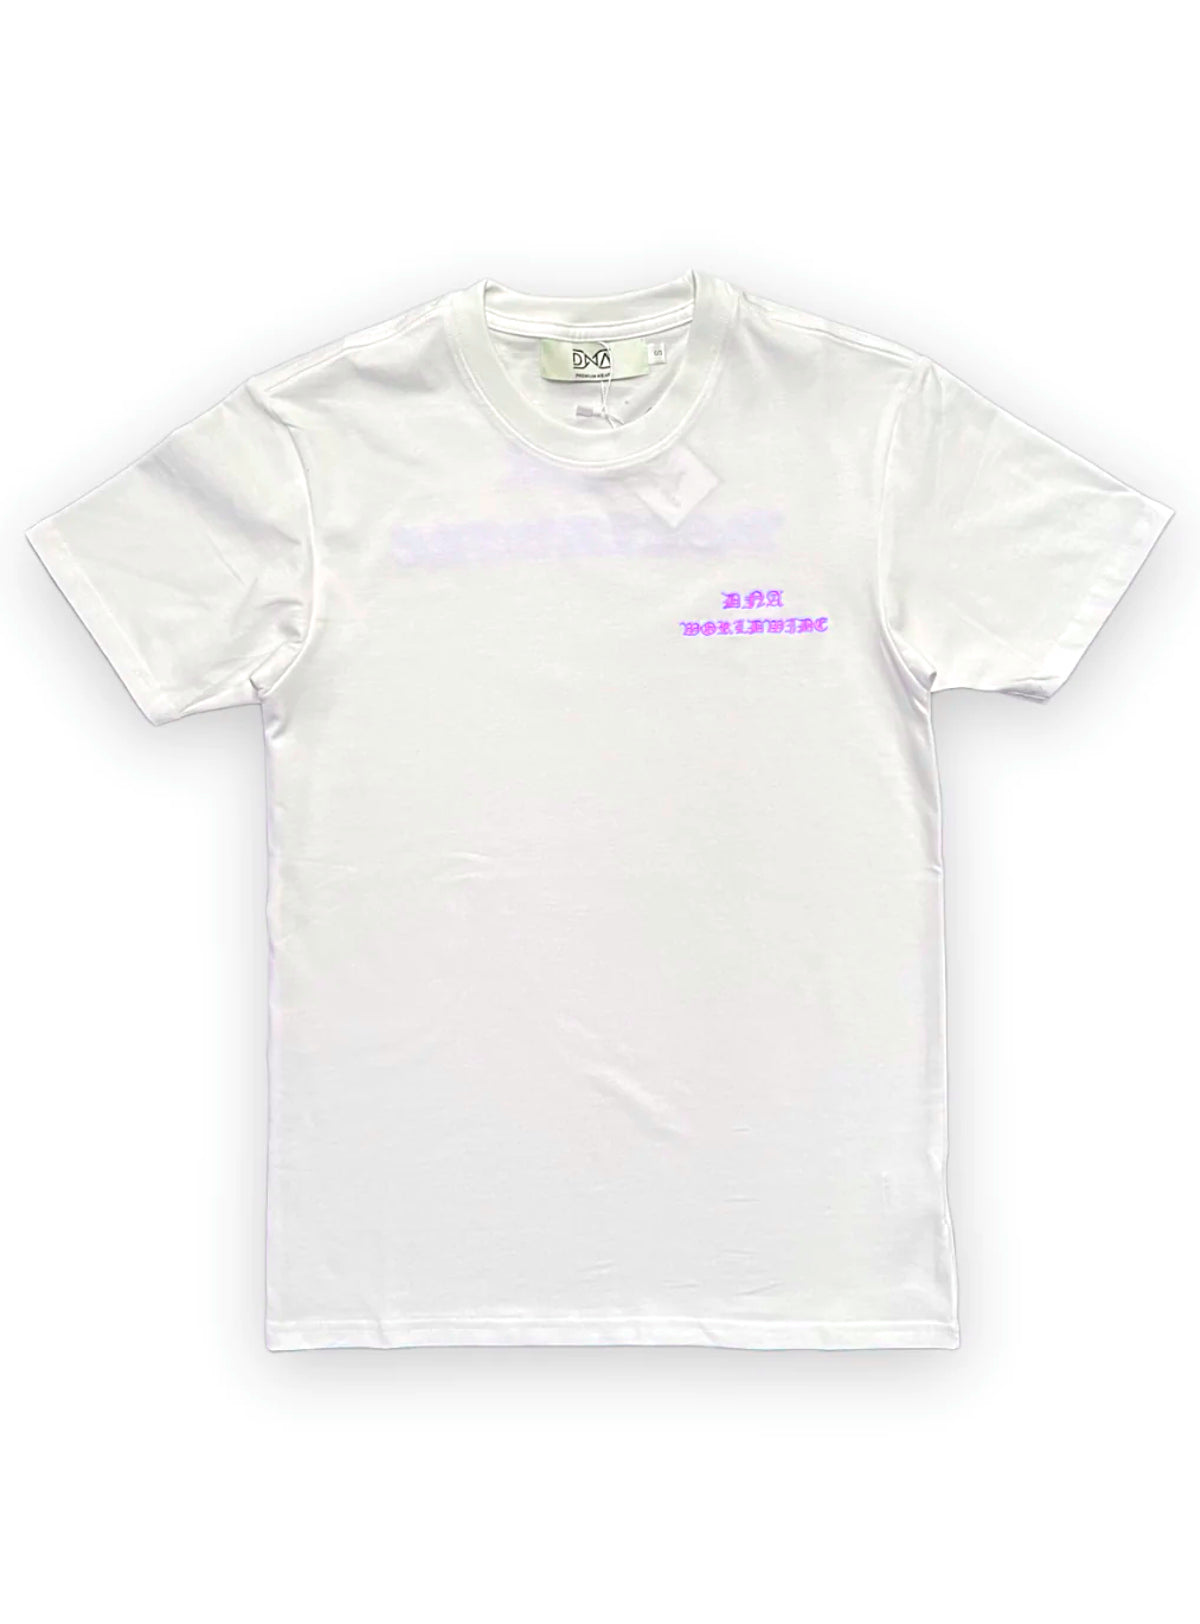 DNA T-Shirts in White